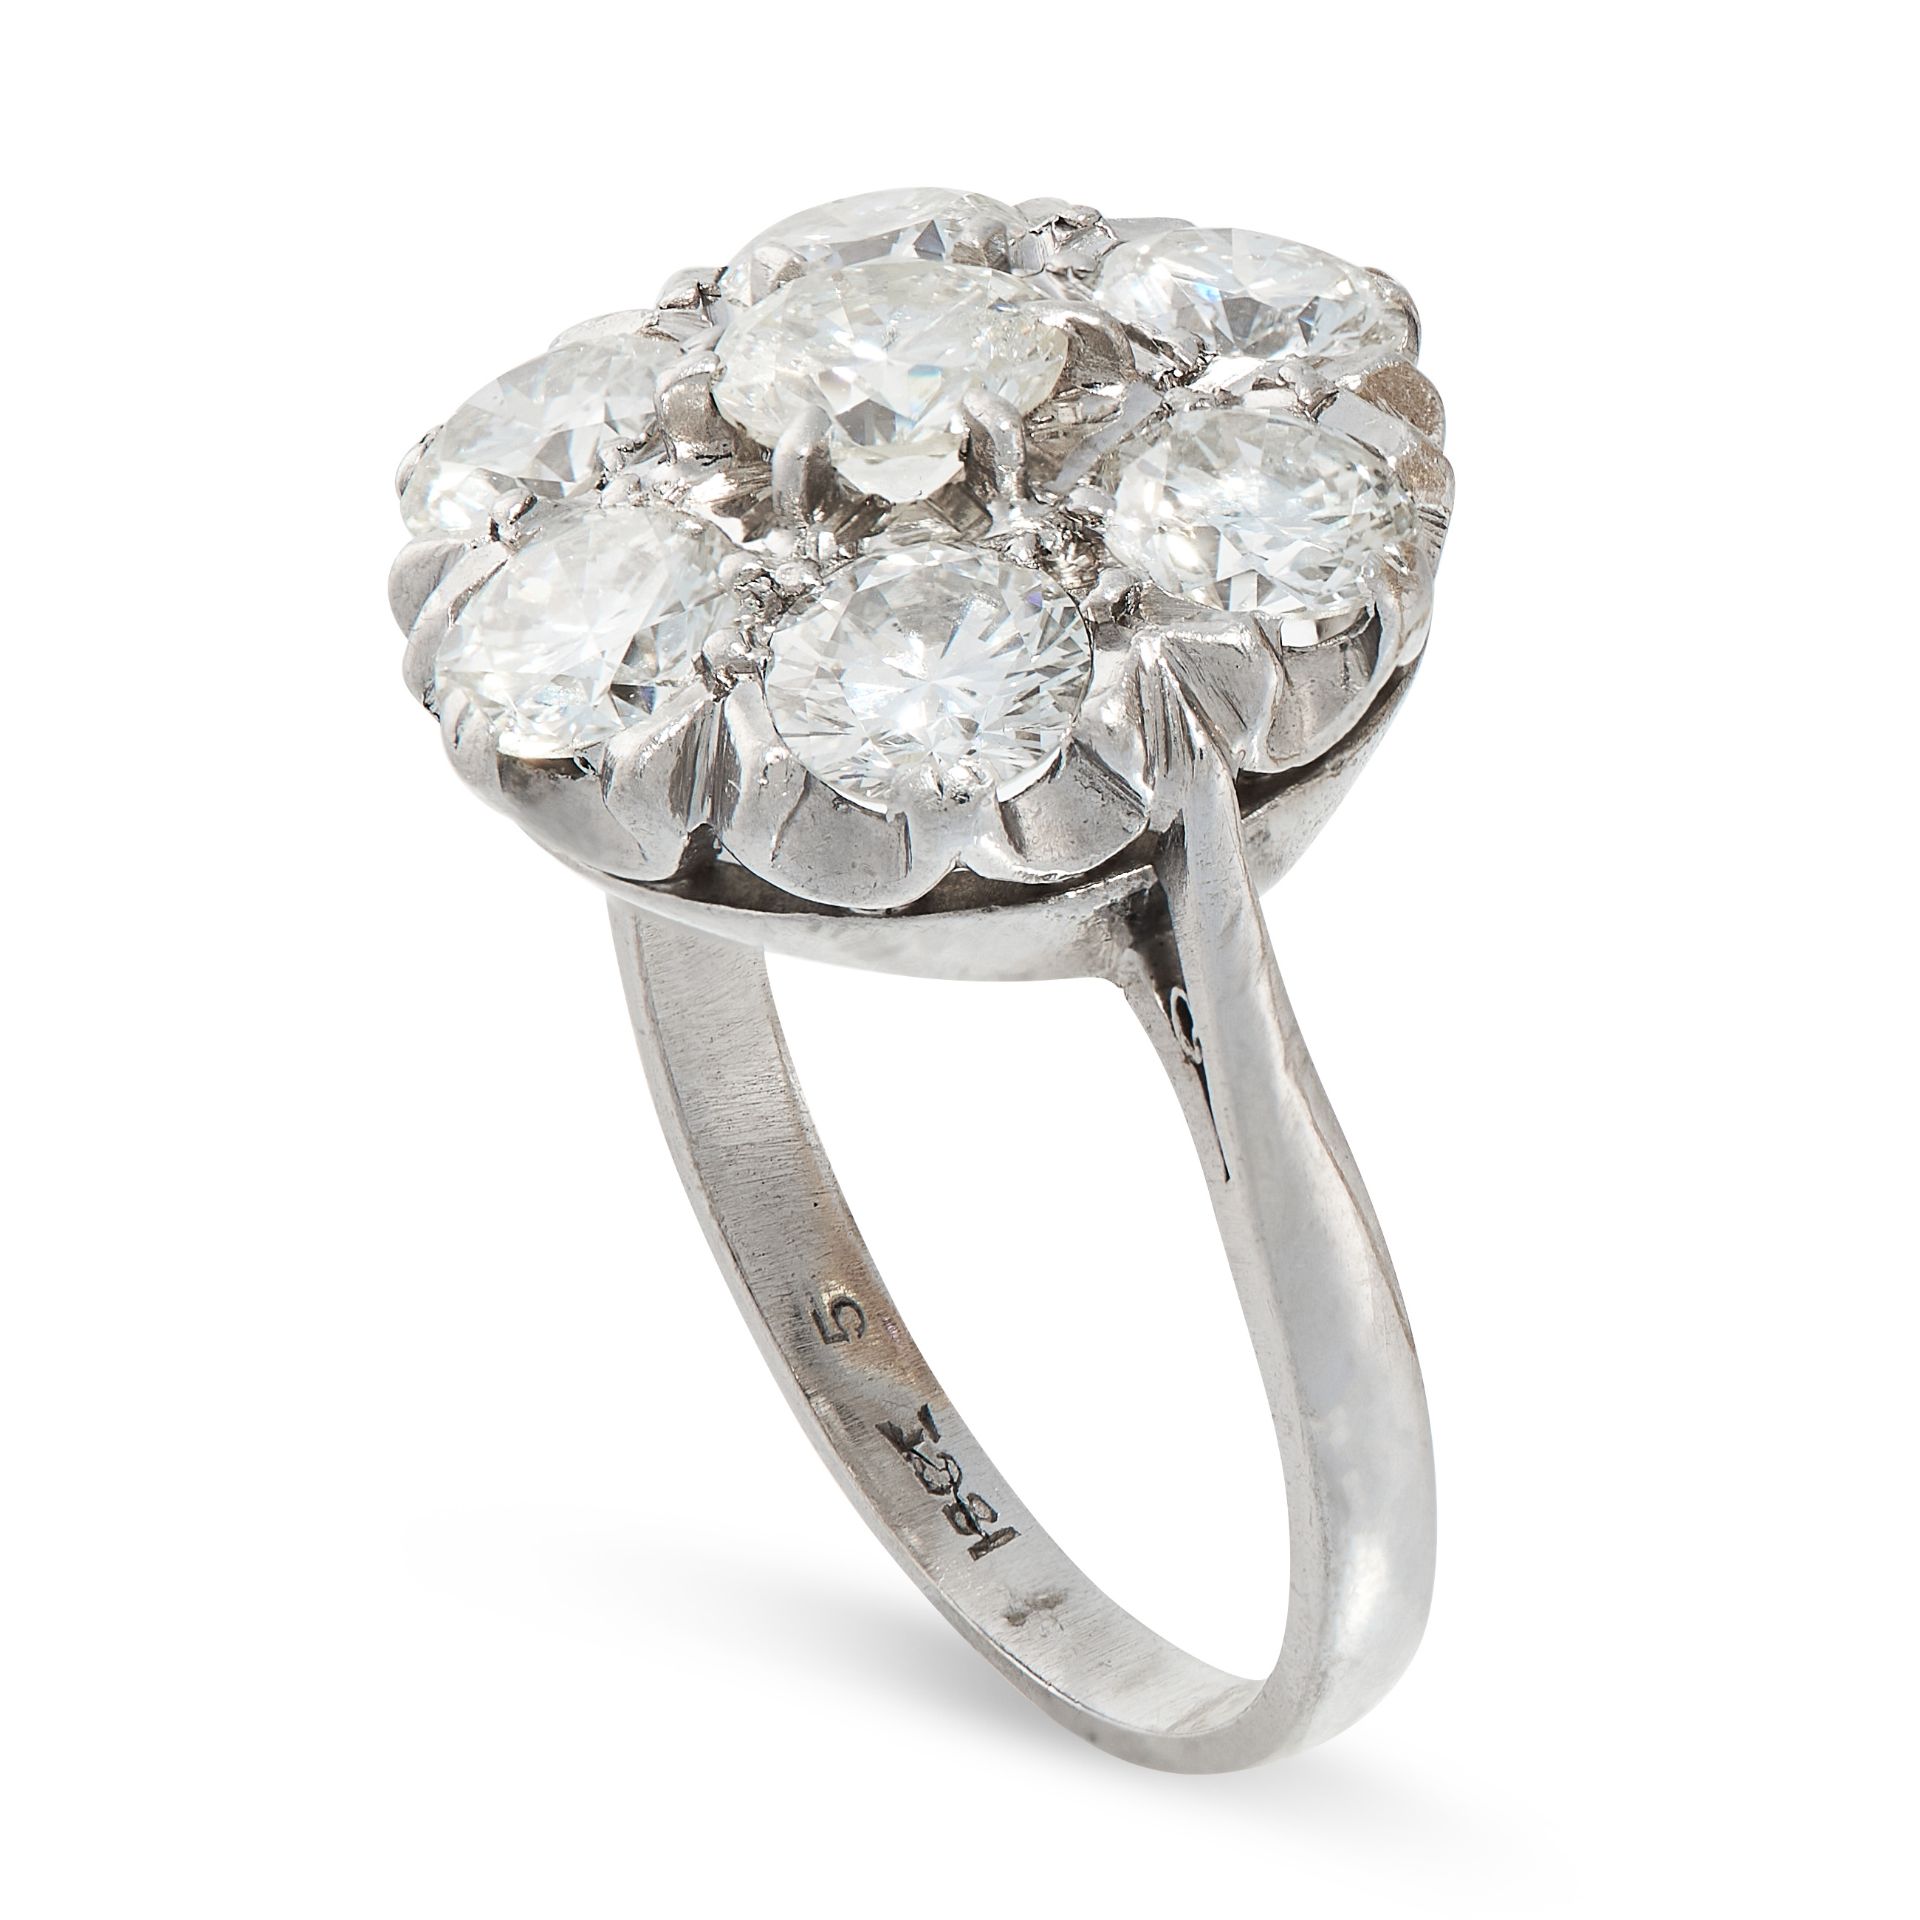 A DIAMOND CLUSTER DRESS RING in 18ct white gold, set with seven round cut diamonds, the diamonds all - Image 2 of 3